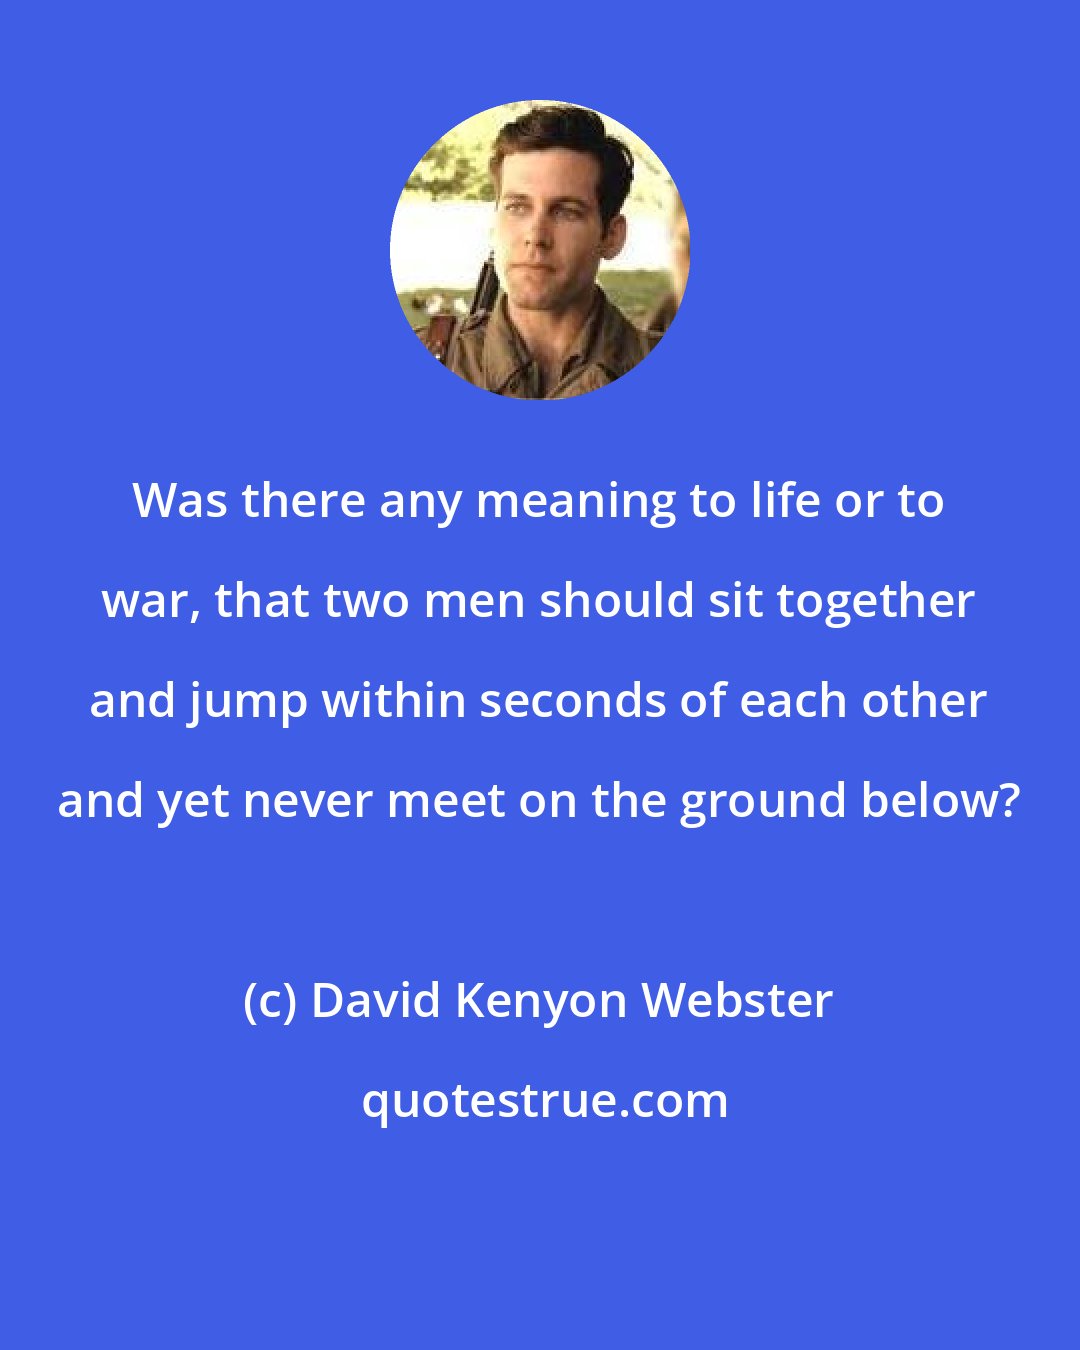 David Kenyon Webster: Was there any meaning to life or to war, that two men should sit together and jump within seconds of each other and yet never meet on the ground below?